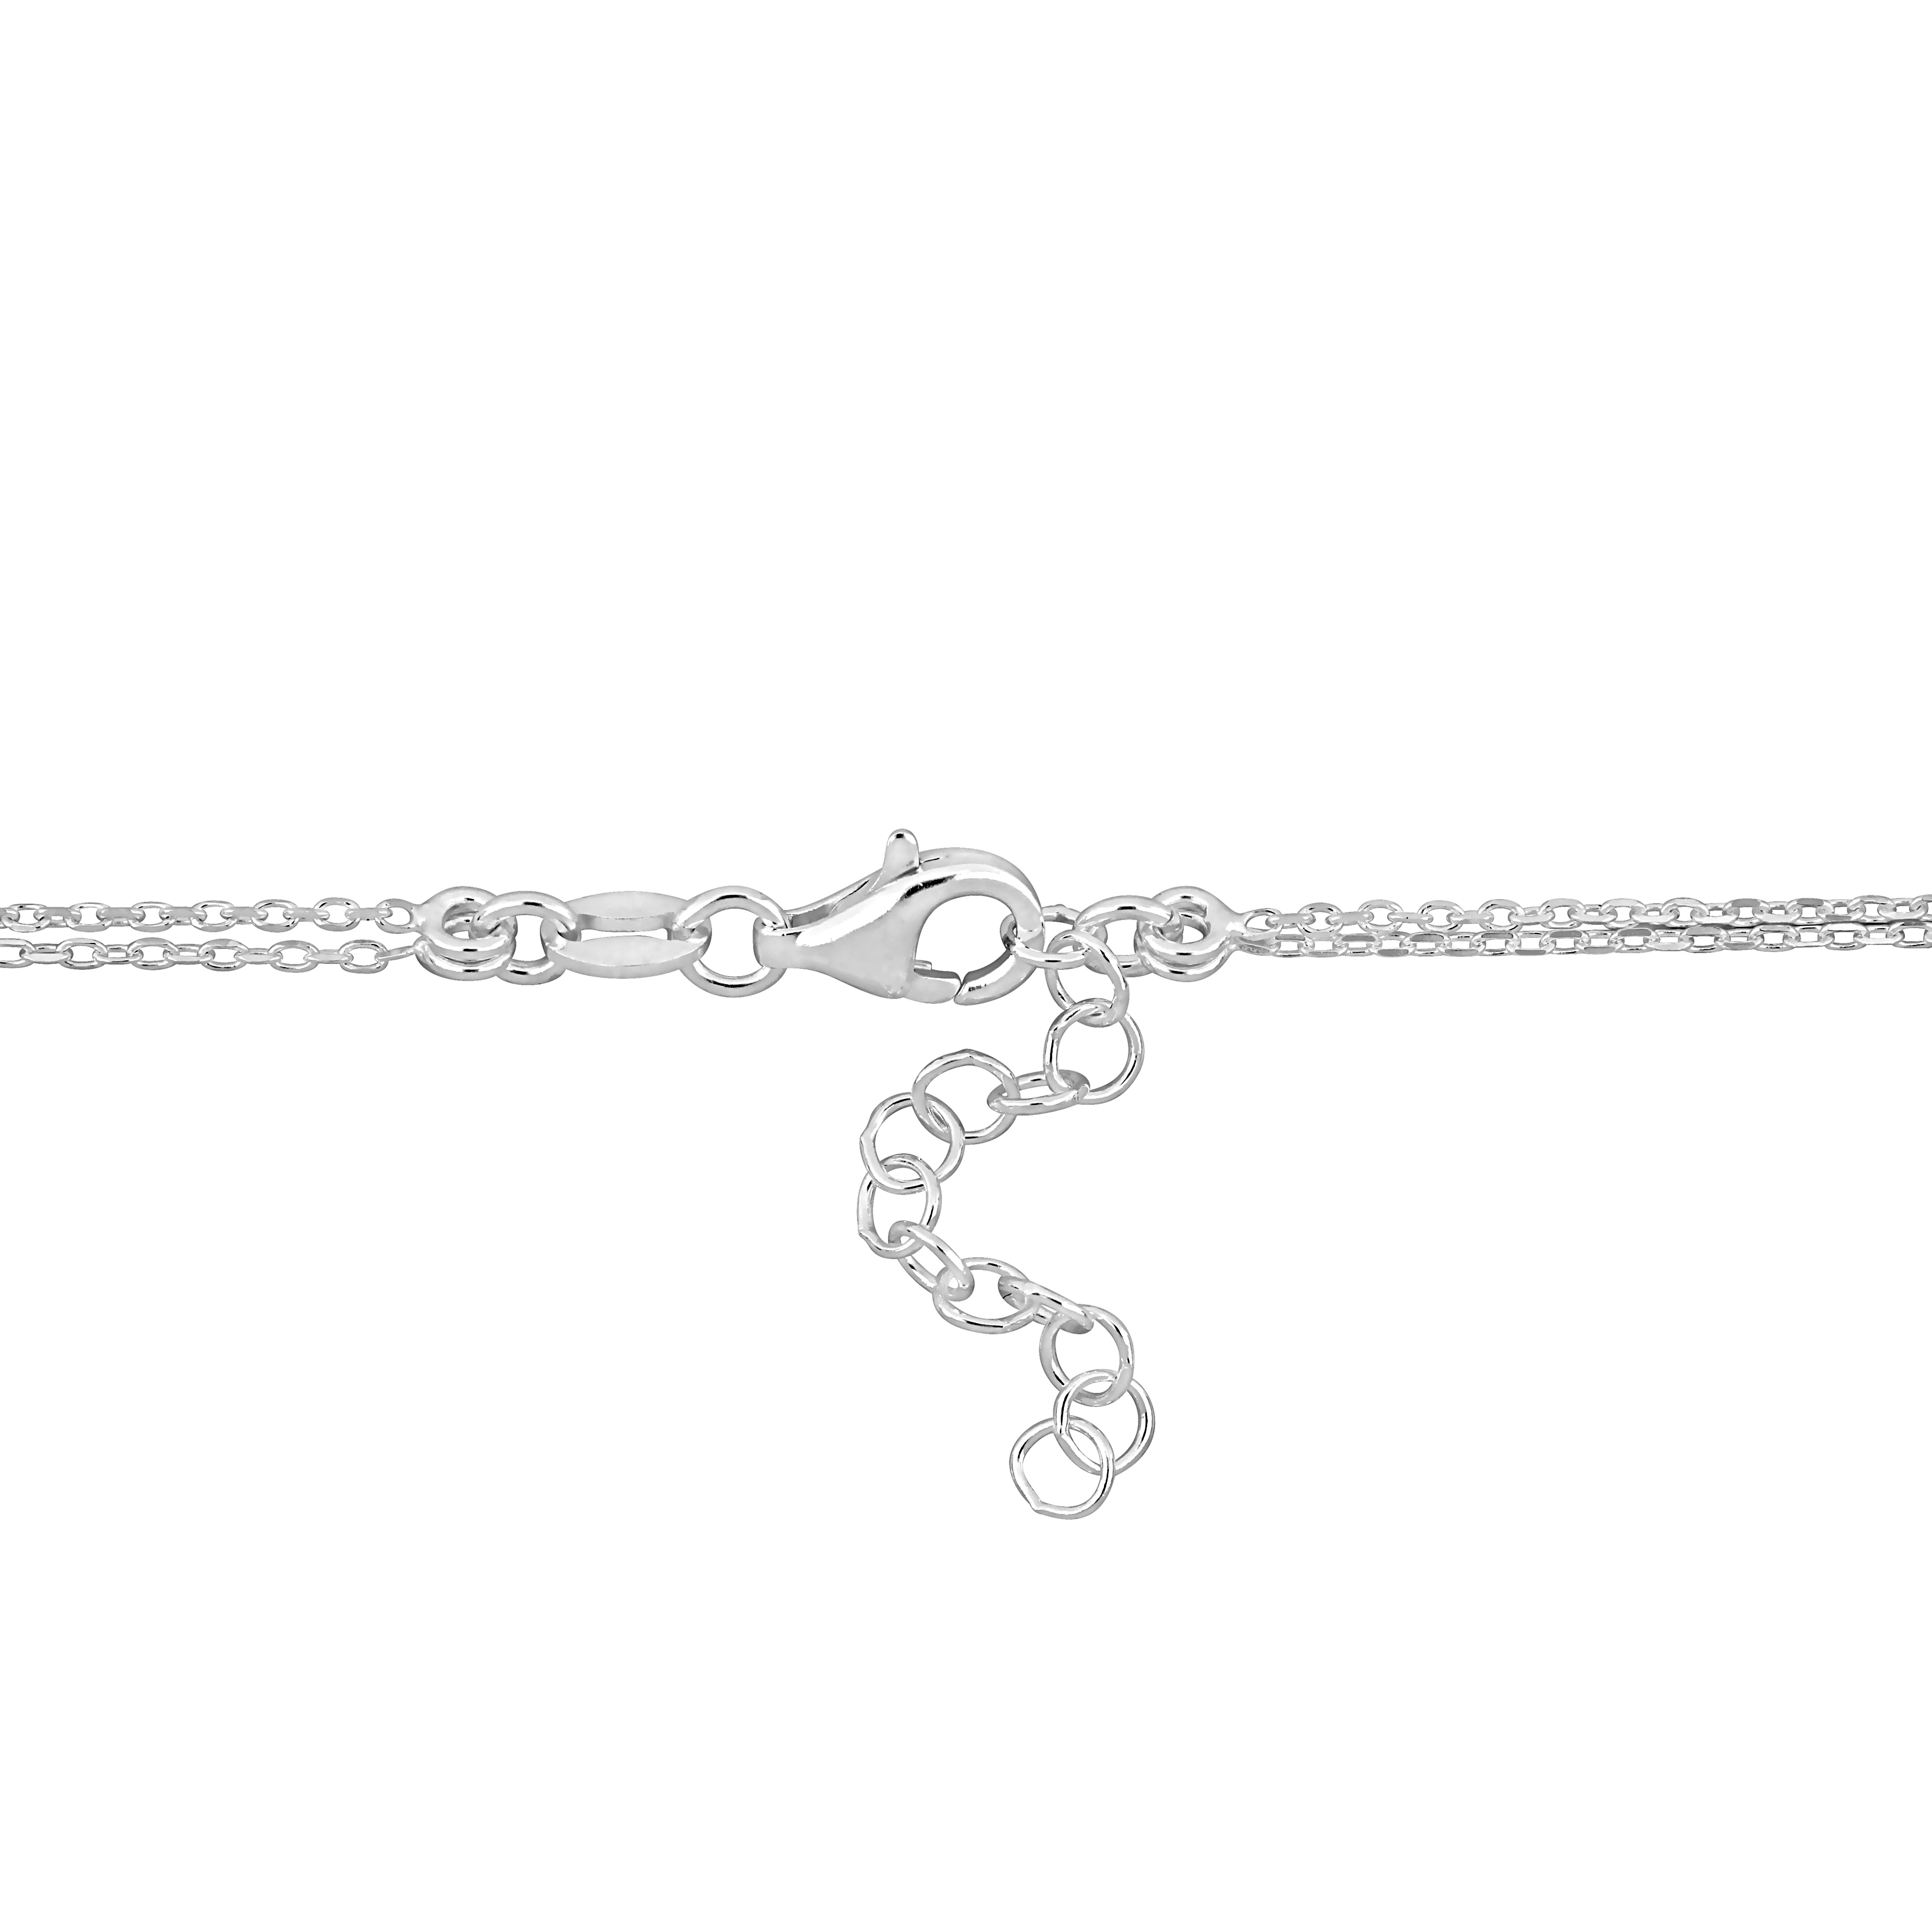 Pink Paw and Bone Two Strand Charm Necklace in Sterling Silver - 16+18+1 in.